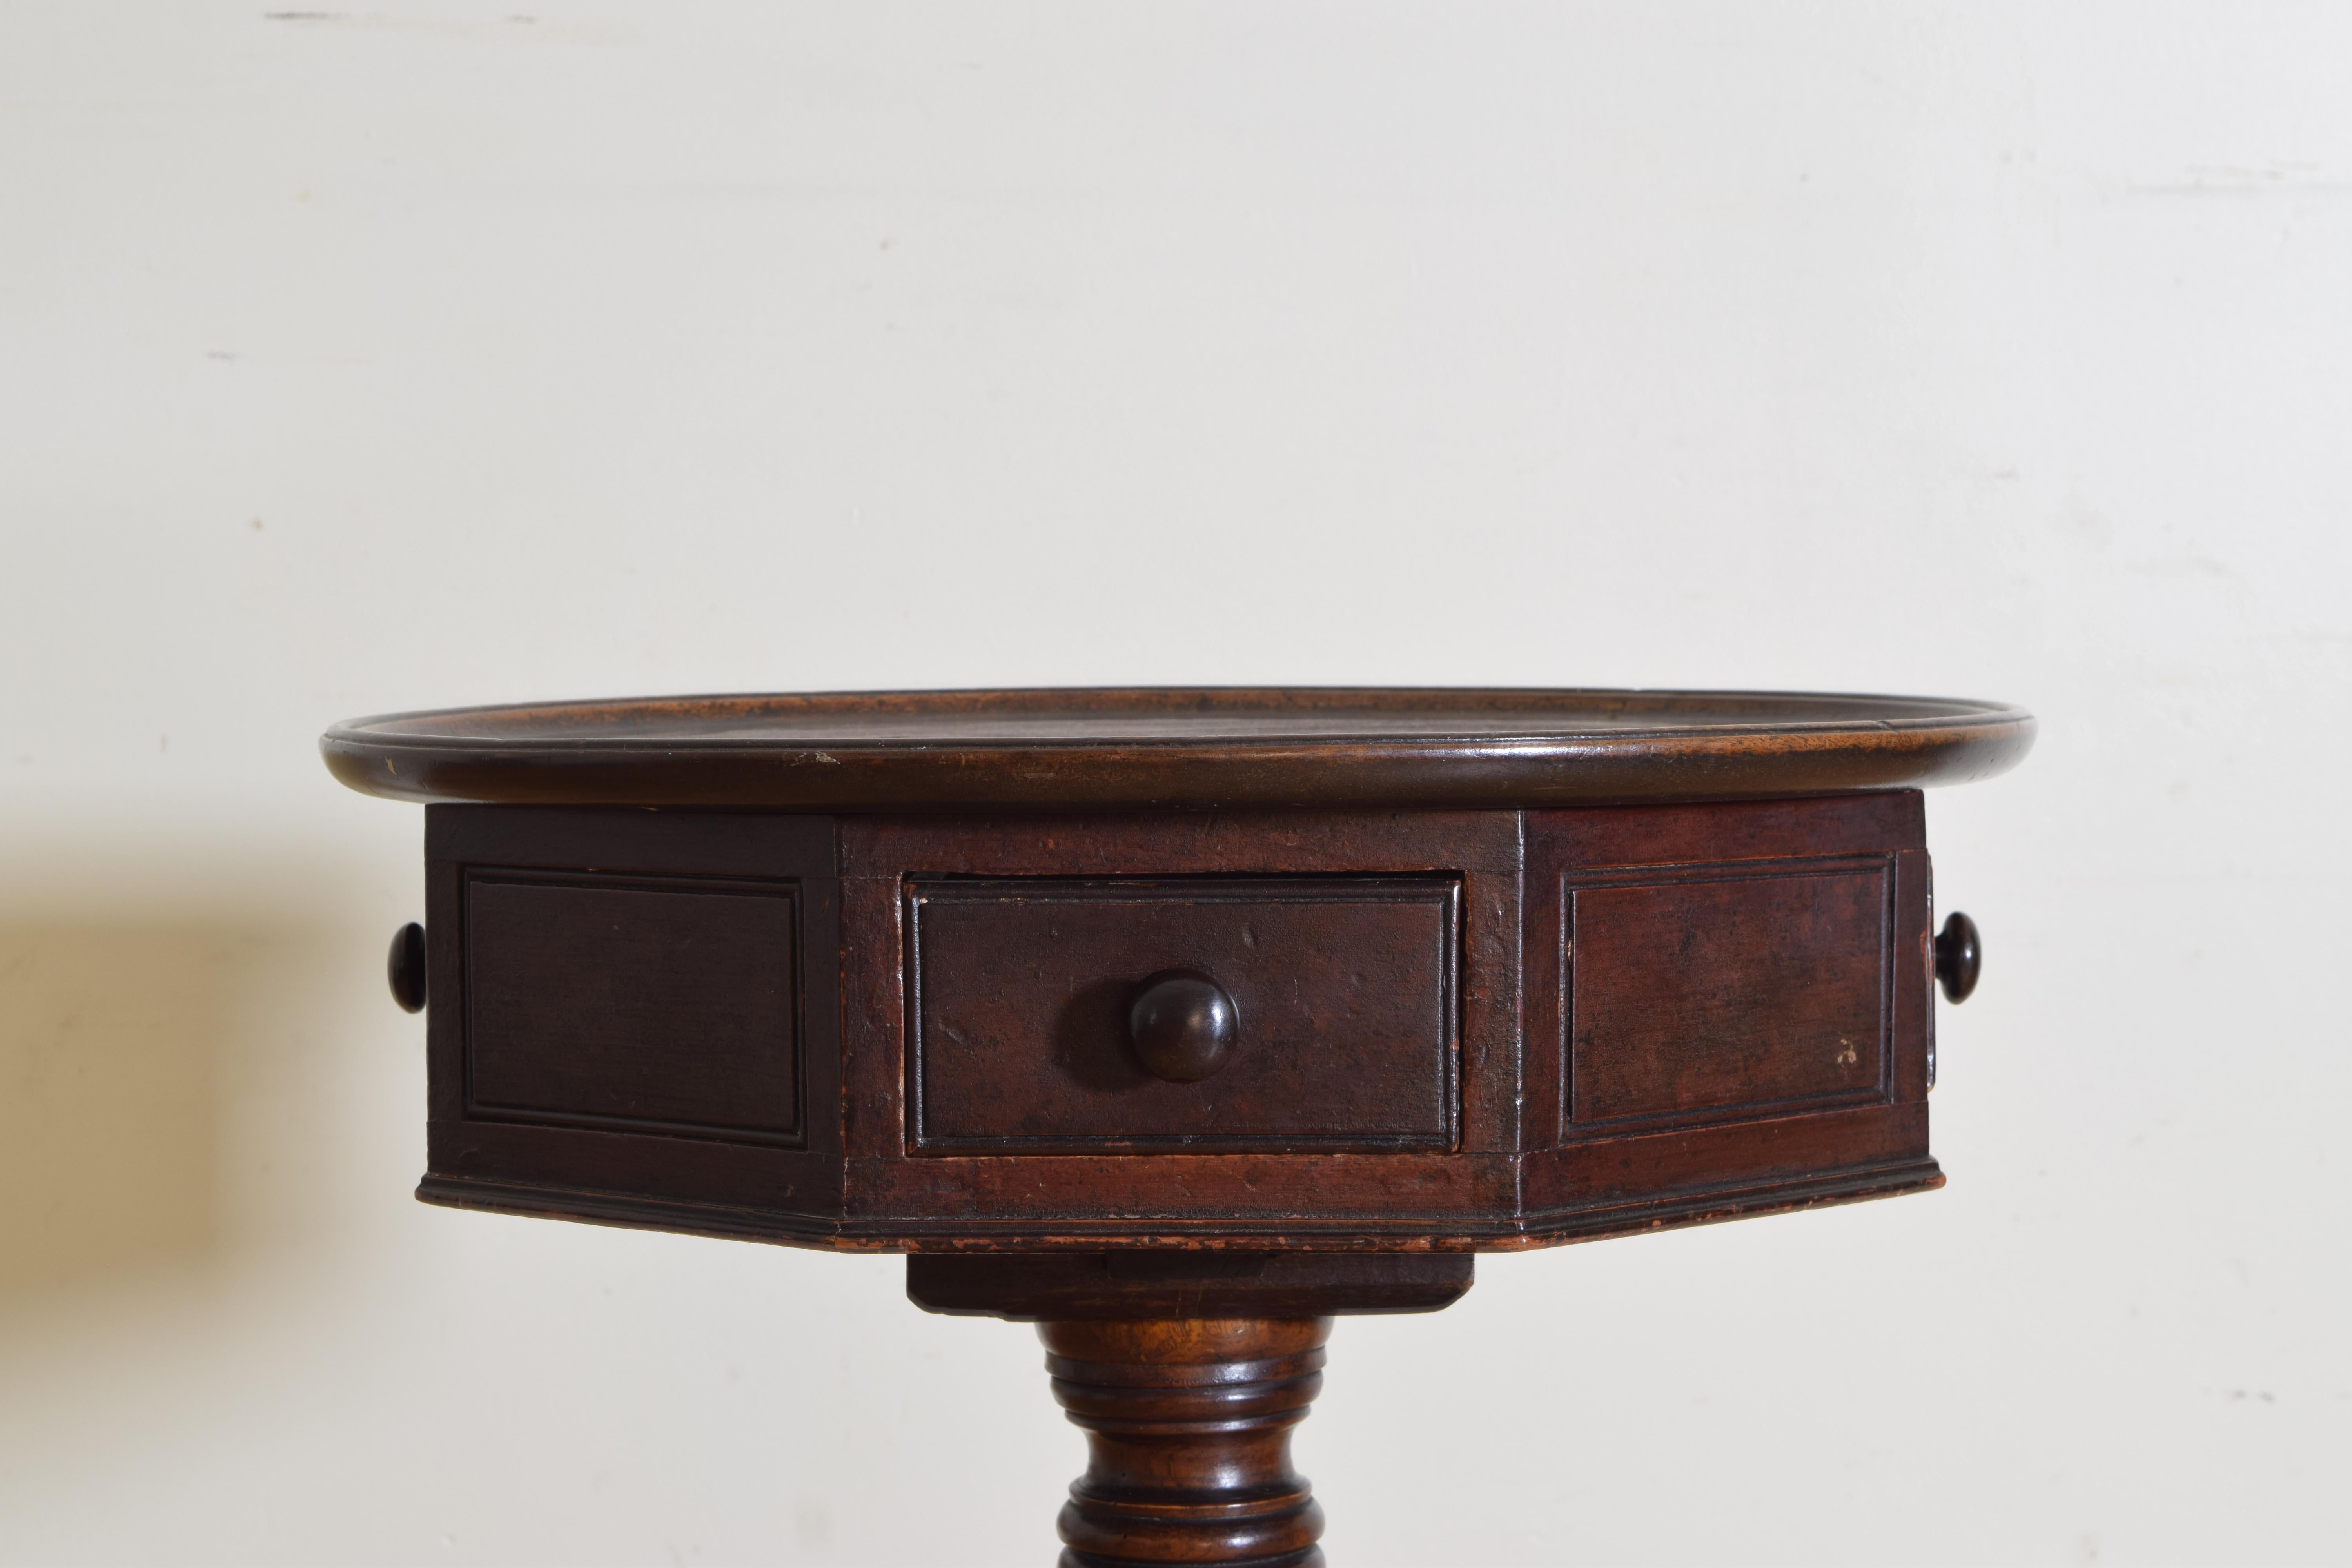 Carved English Mahogany and Grained Ash Drum Table with Dish Top, circa 1830